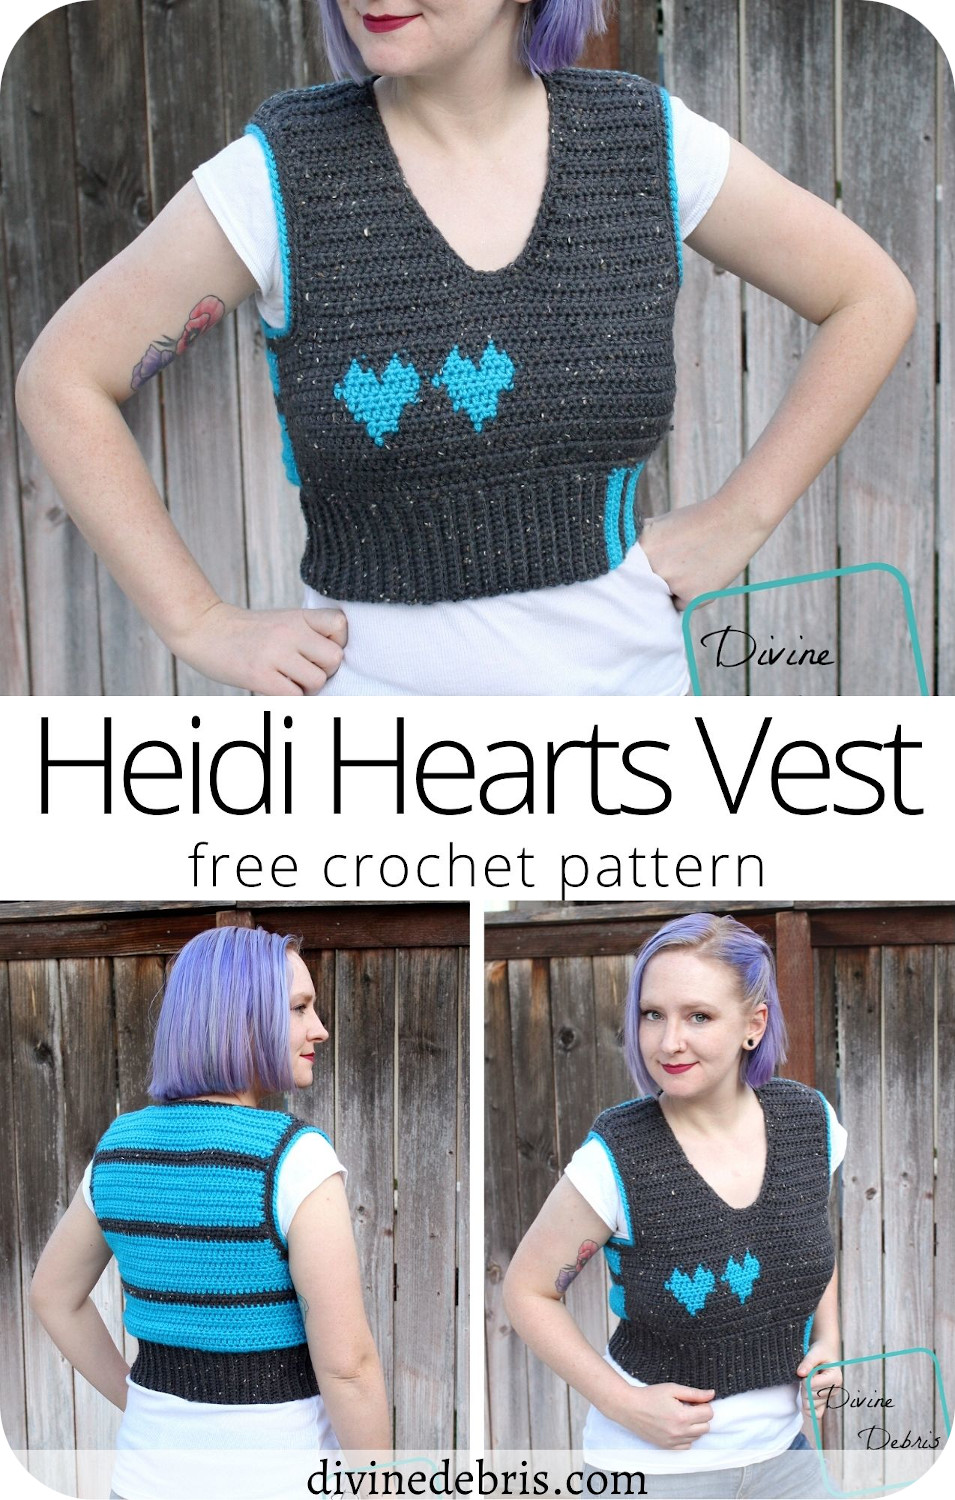 Learn to make a fun and exciting vest with a lovely heart detail, the Heidi Hearts Vest, from a free crochet pattern on DivineDebris.com